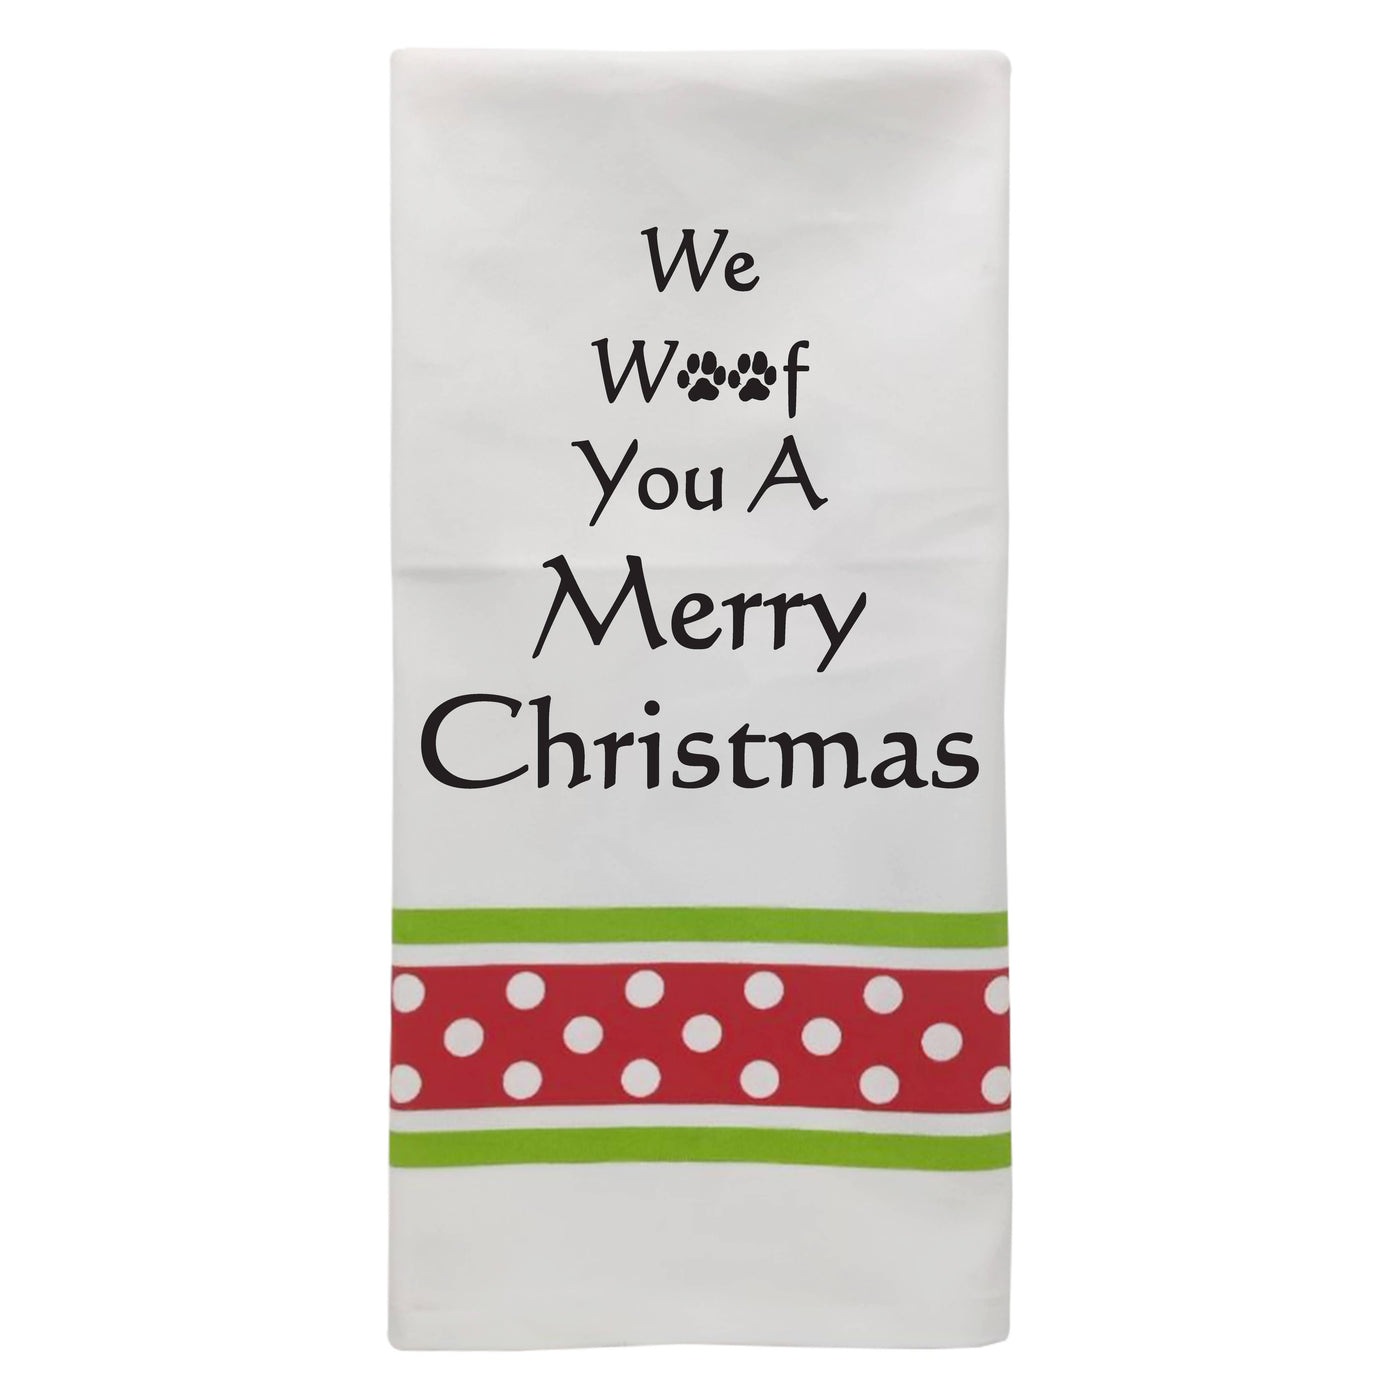 We Woof You A Merry Christmas…Towel